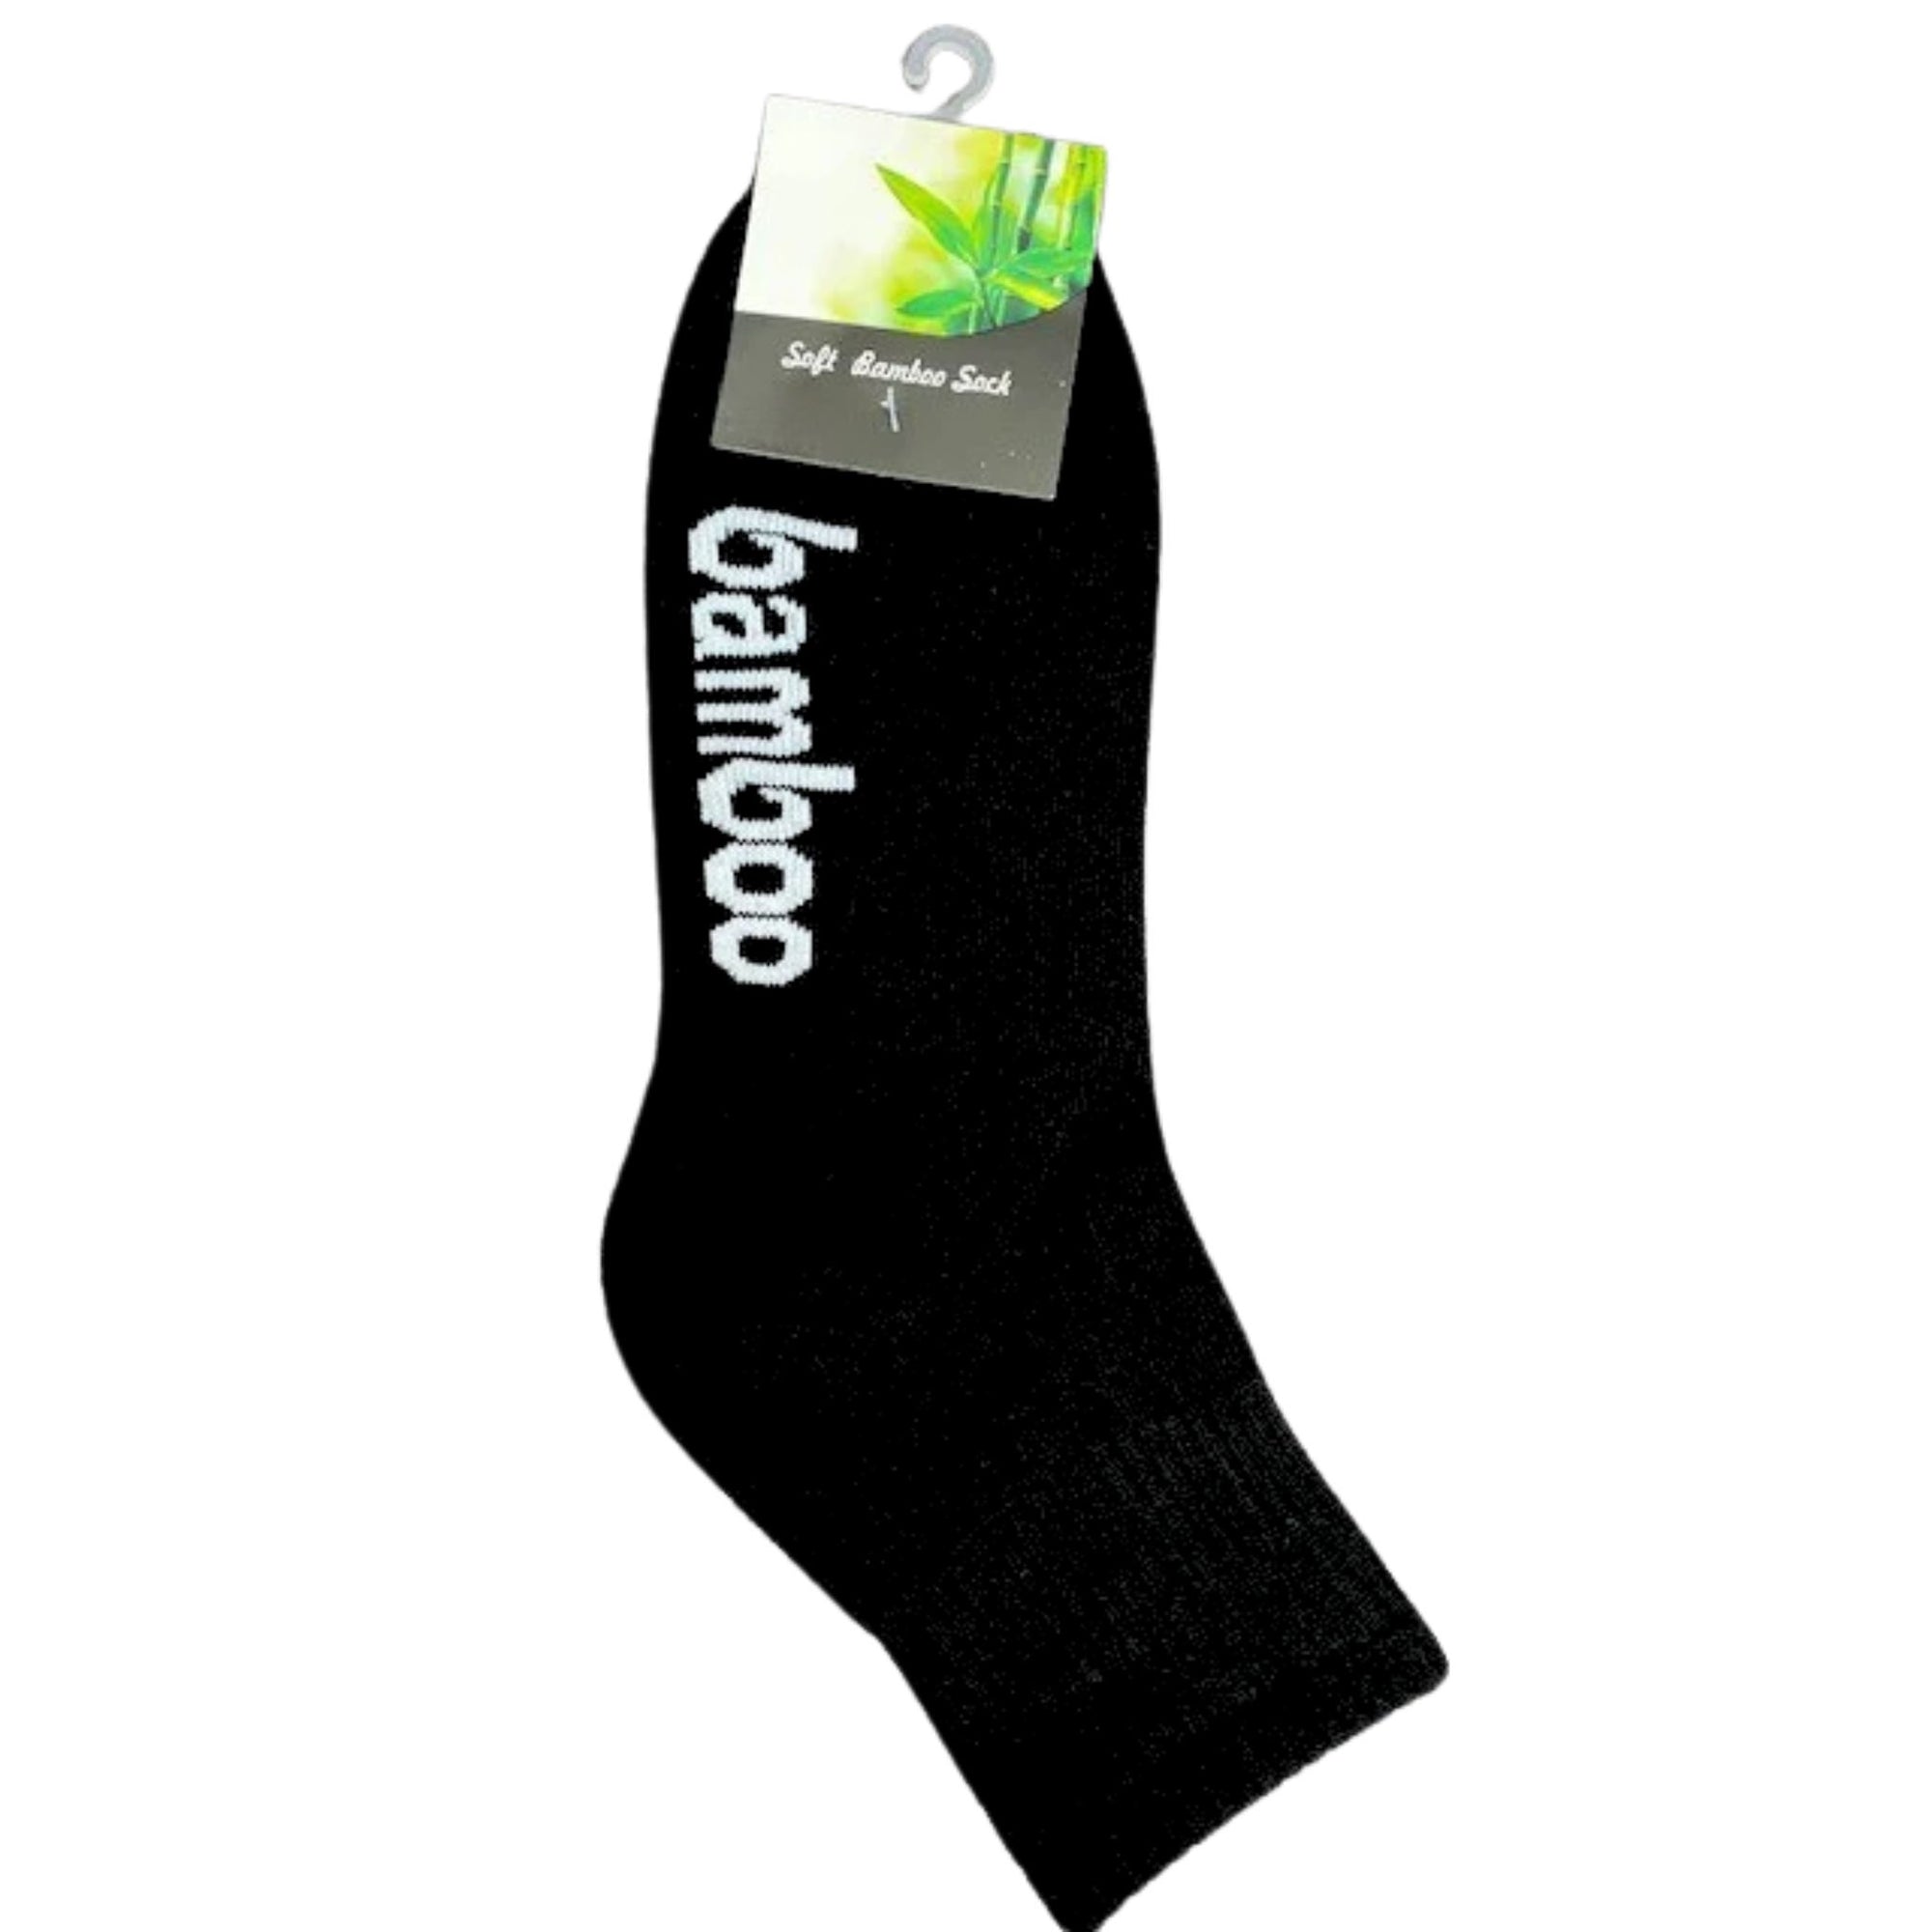 Black Bamboo Socks AS04 (Pair) - South East Clearance Centre